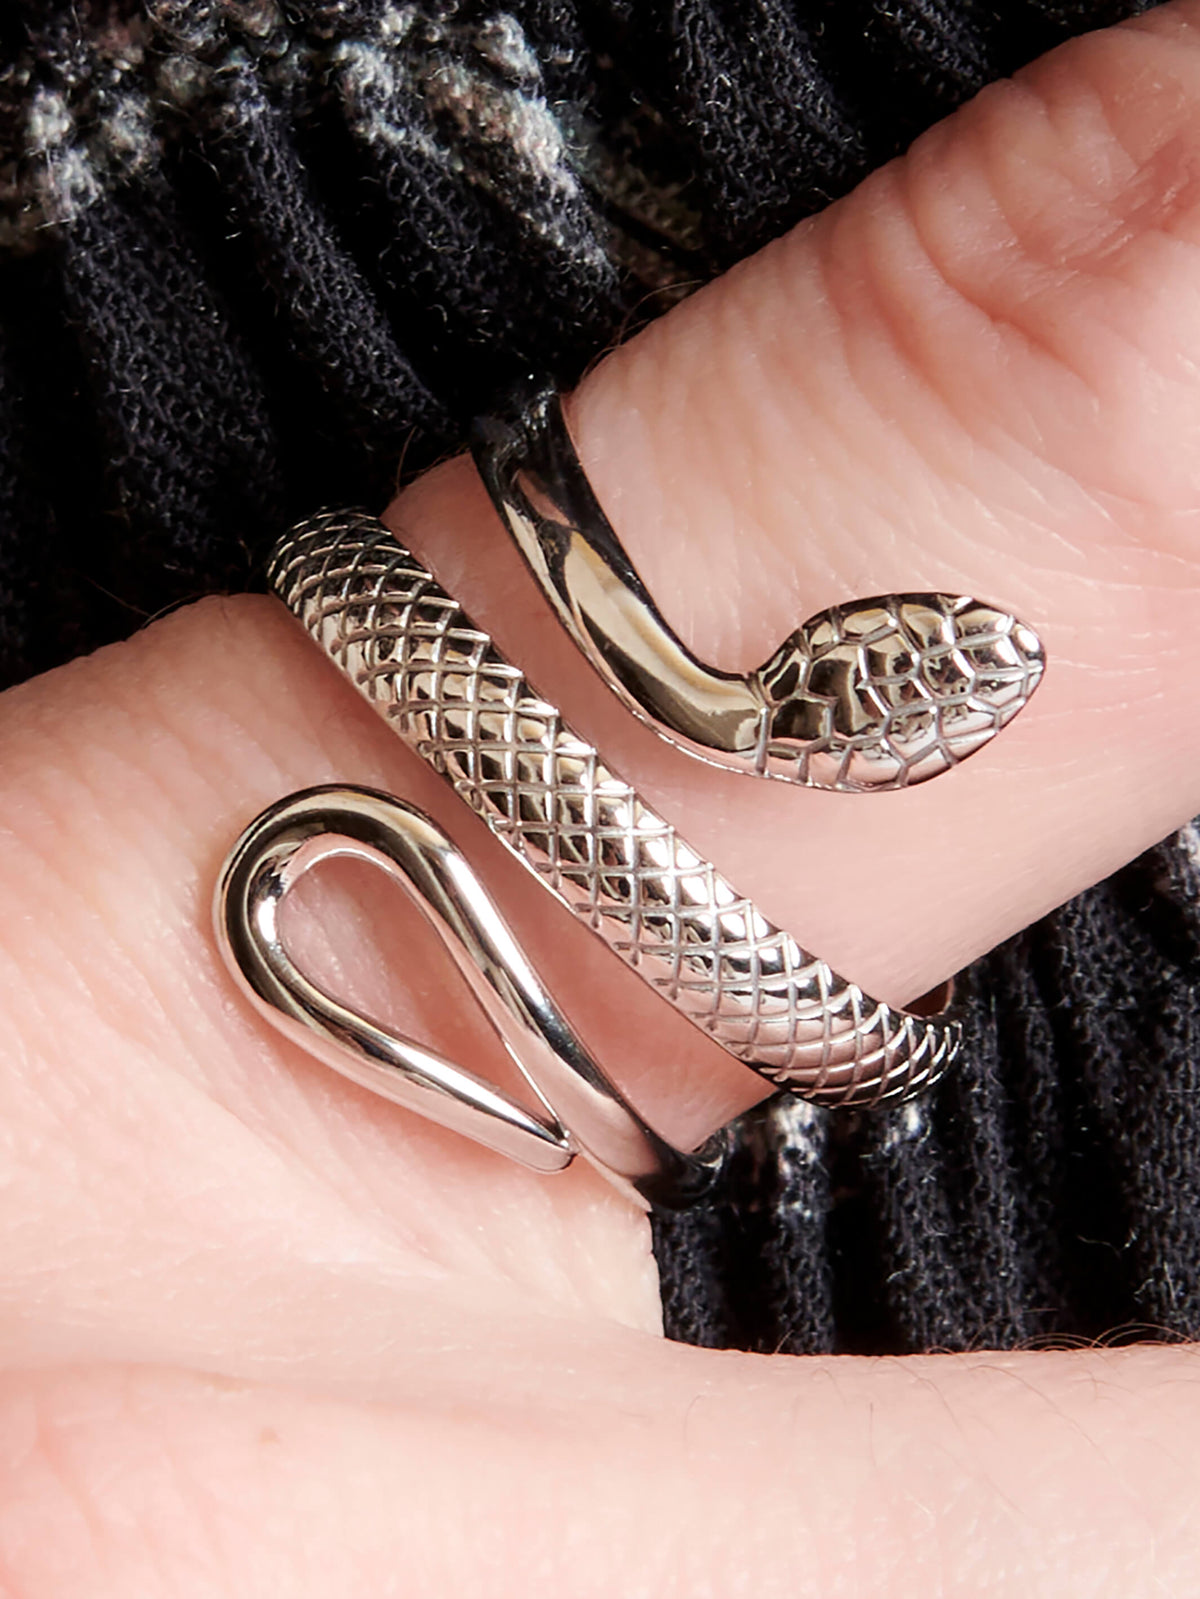 Silver snake wrapping around finger